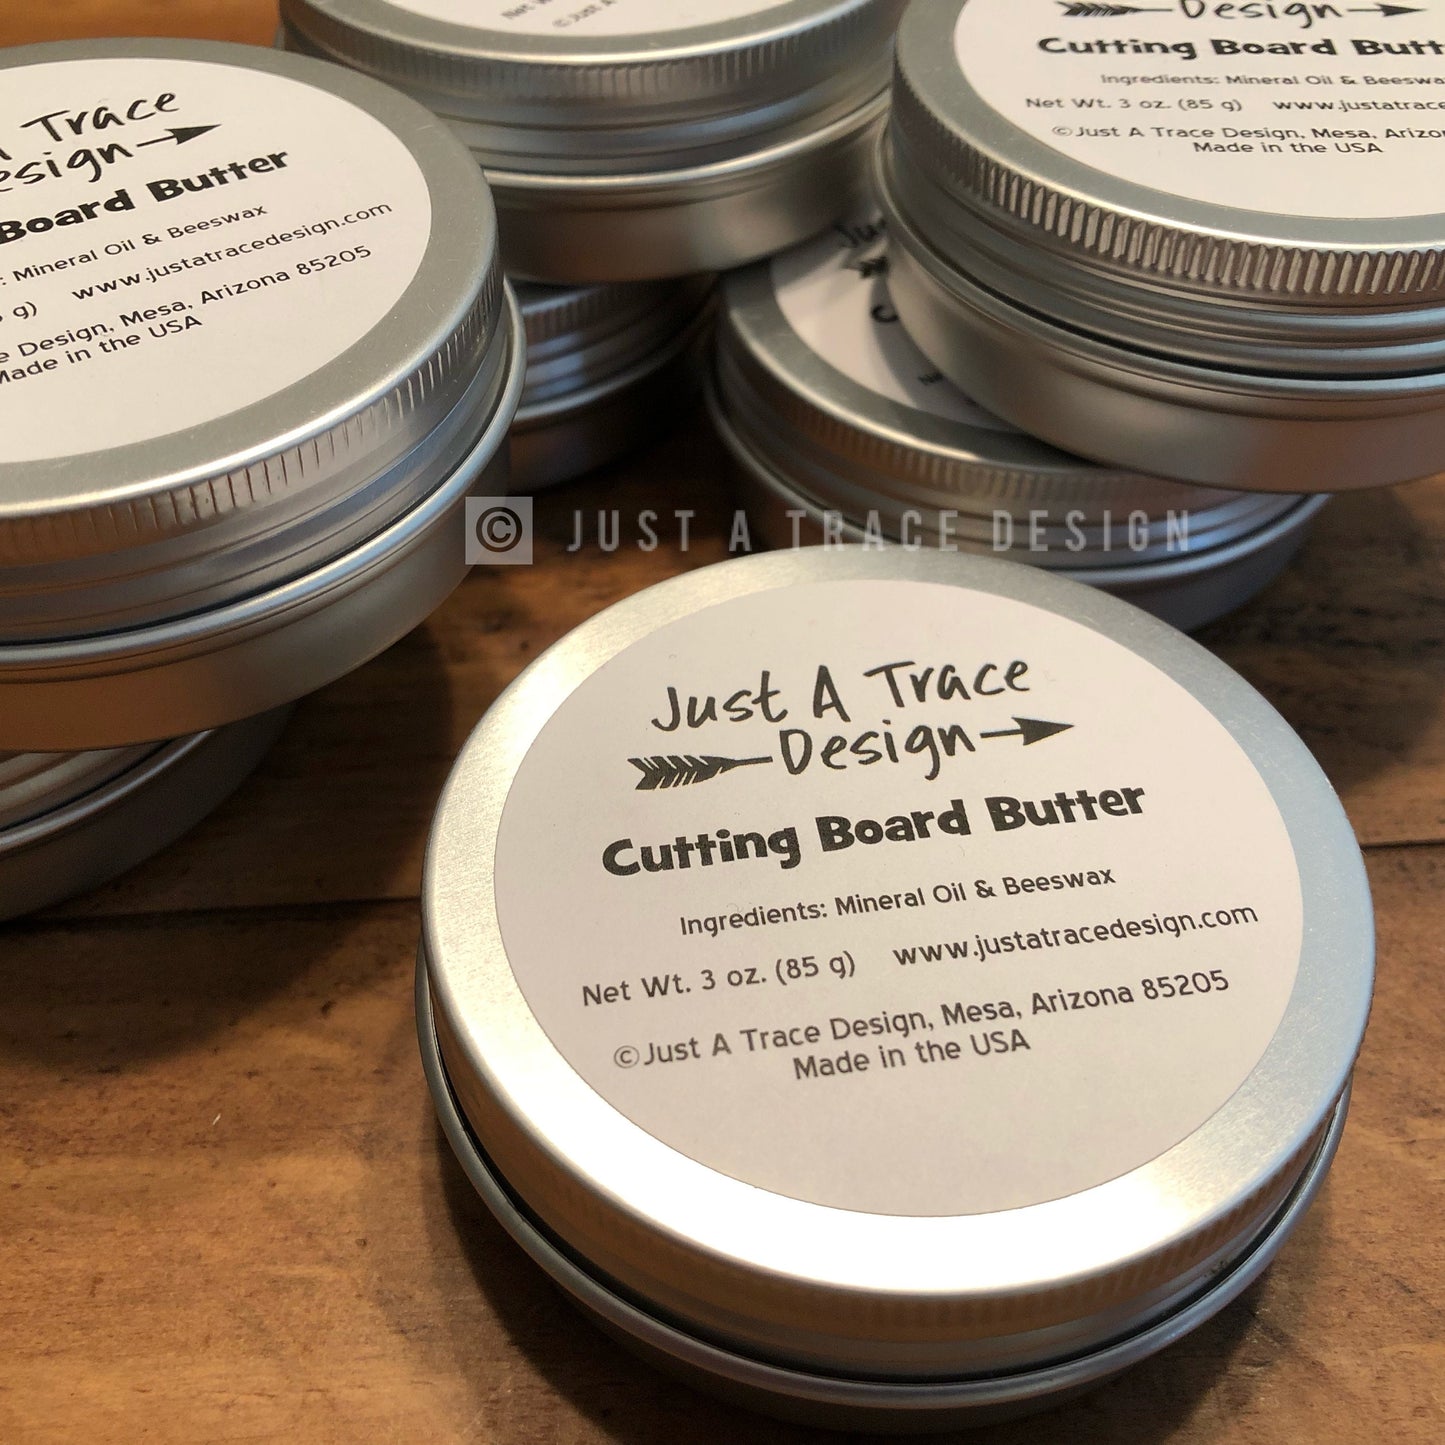 Cutting Board Butter, Cutting Board Conditioner, Butcher Block Oil, Spoon Butter, Food Safe